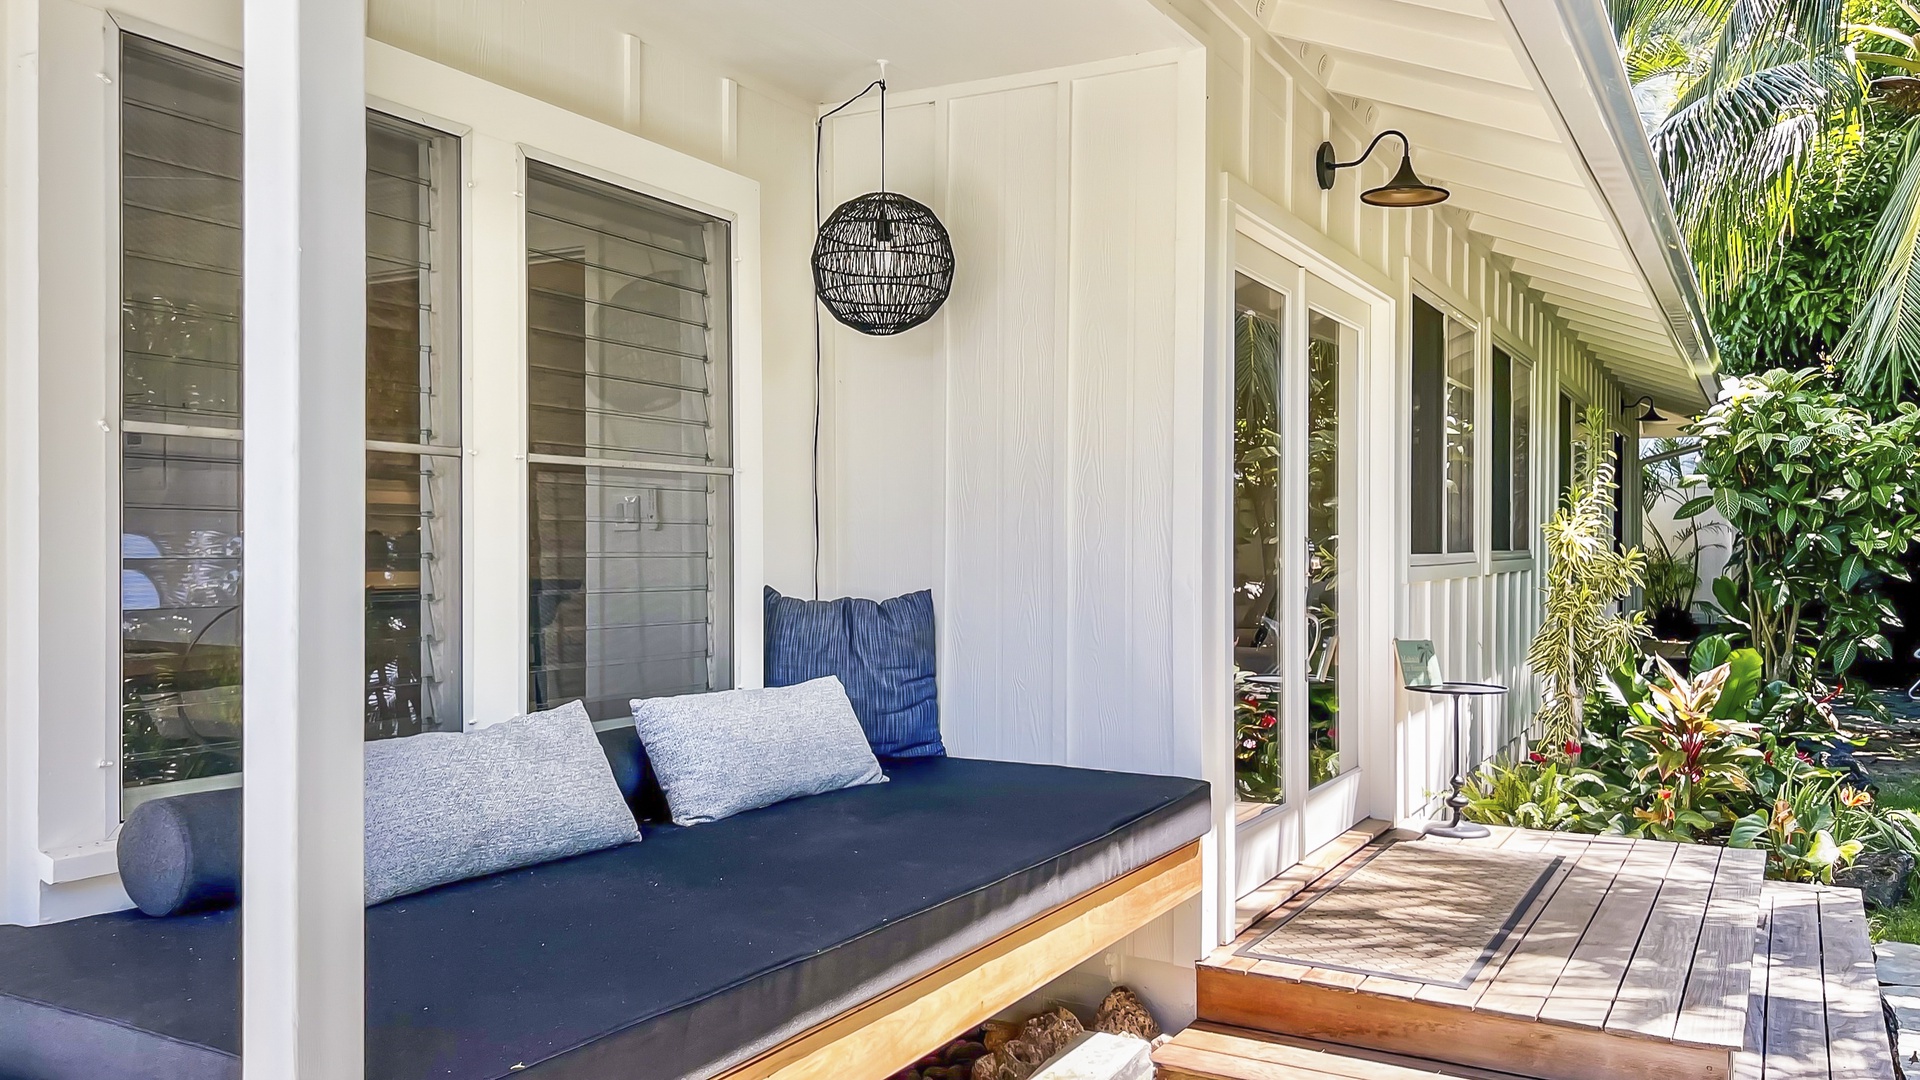 Kailua Vacation Rentals, Lanikai Ola Nani - Nestled in nature, our exterior day bed invites you to unwind and savor the beauty of the outdoors.